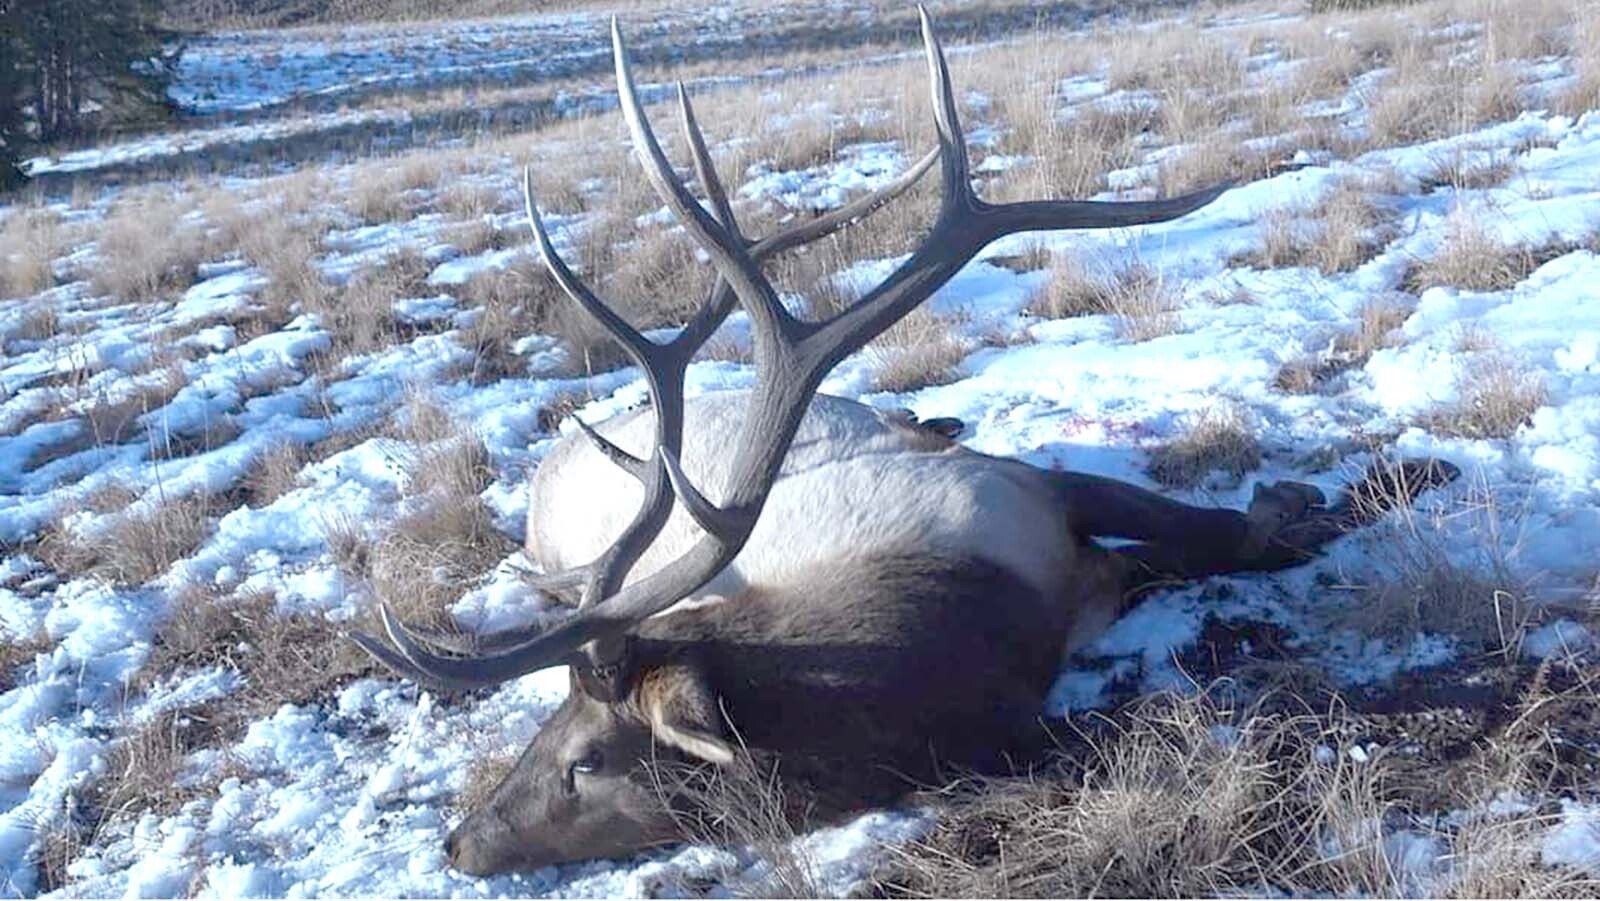 Northeast Wyoming resident Owen Miller is an avid hunter and hunting guide. He bagged this huge bull on an over-the-counter elk tag in Colorado in 2020. However, Colorado is discontinuing some elk tags for non-residents.